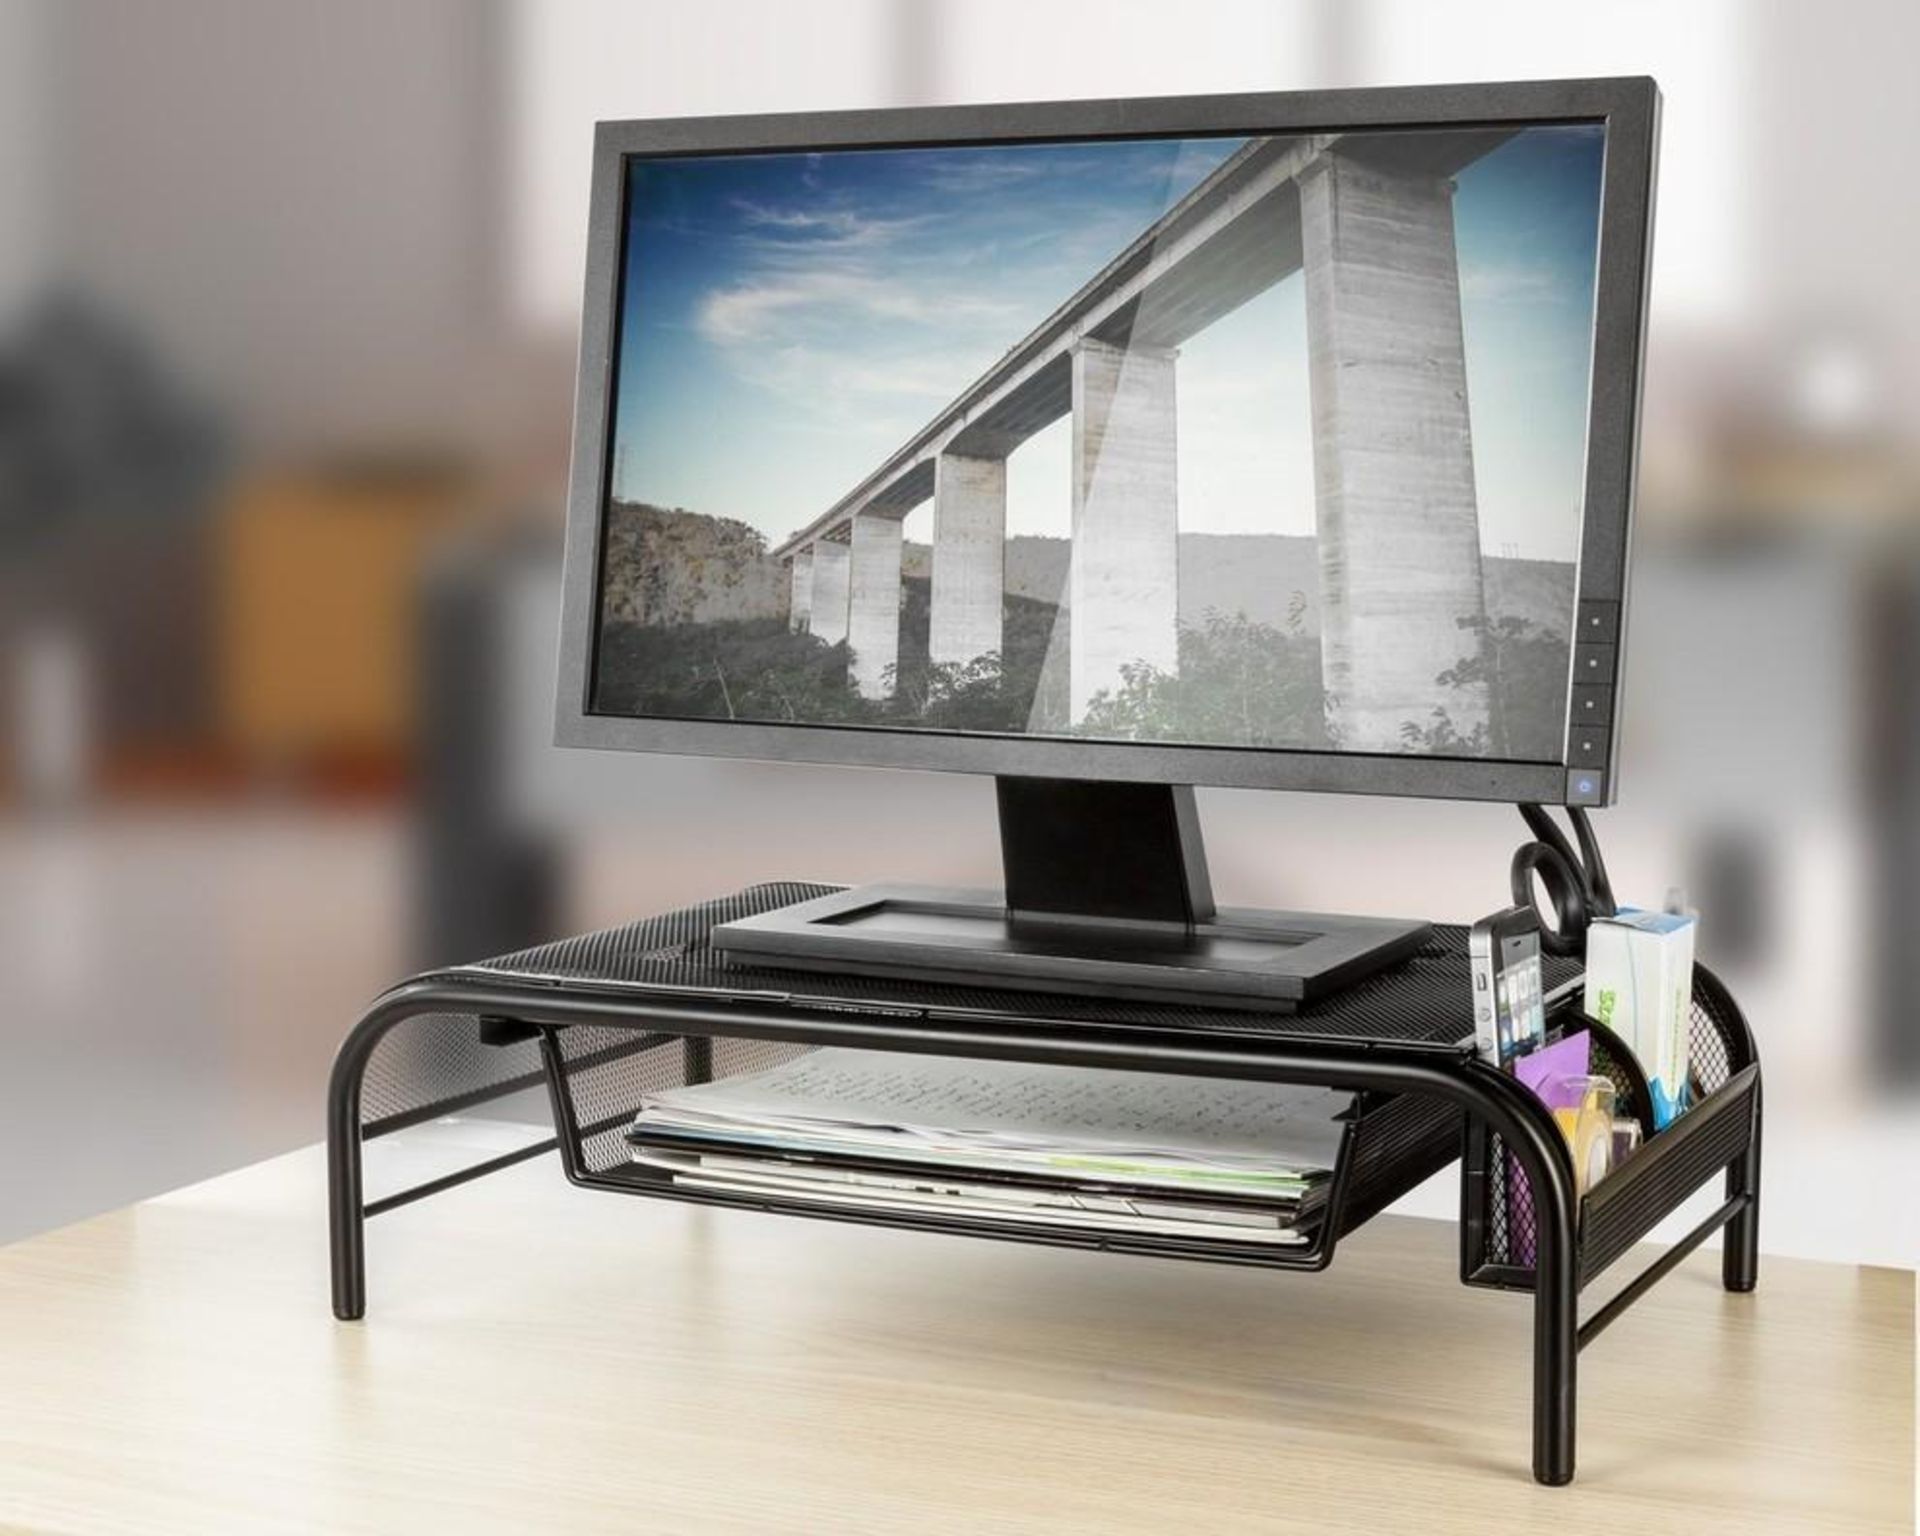 2 X PALLETS CONTAINING 192 X NEW MONITOR STAND WITH DRAWER AND SIDE ORGANISER - RRP £3840